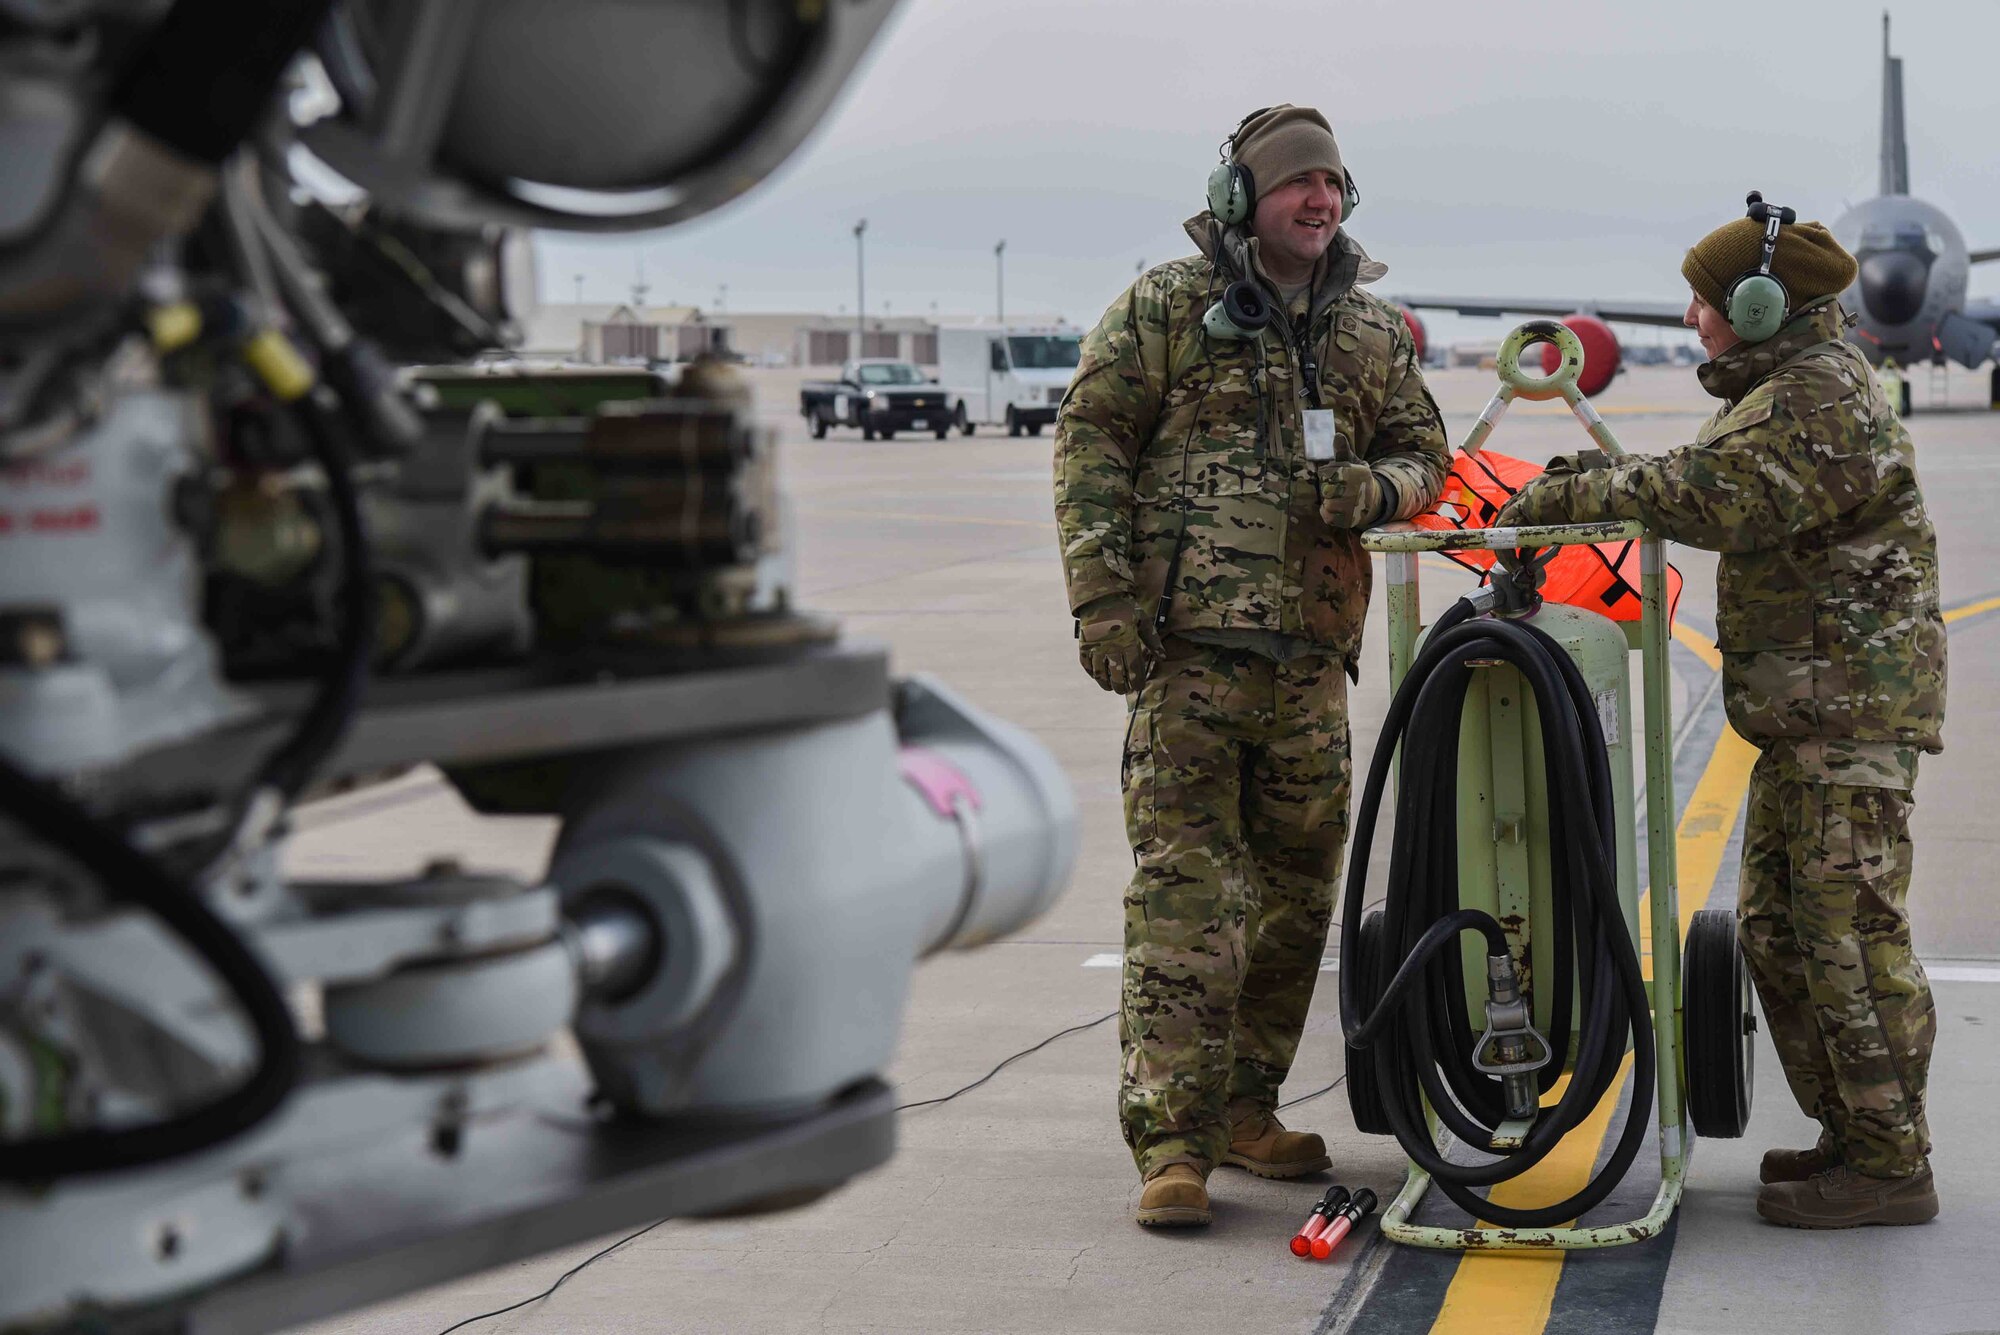 Master Sgt. Arenda Jackson and Master Sgt. Scott Perkins, 931st Aircraft Maintenance Squadron crew chiefs, wait for the KC-46A Pegasus to begin taxiing Feb. 21, 2019, at McConnell Air Force Base, Kan. As a part of the familiarization period with the KC-46, aircrews began procedures for taxiing the aircraft around the airfield.  The next step toward operationally refueling will be a test flight. McConnell will be receiving a 32 additional next-generation tankers for a total of 36 aircraft. (This photo has been altered for security purposes by blurring out identification badges) (U.S. Air Force photo by Airman 1st Class Alexi Myrick)